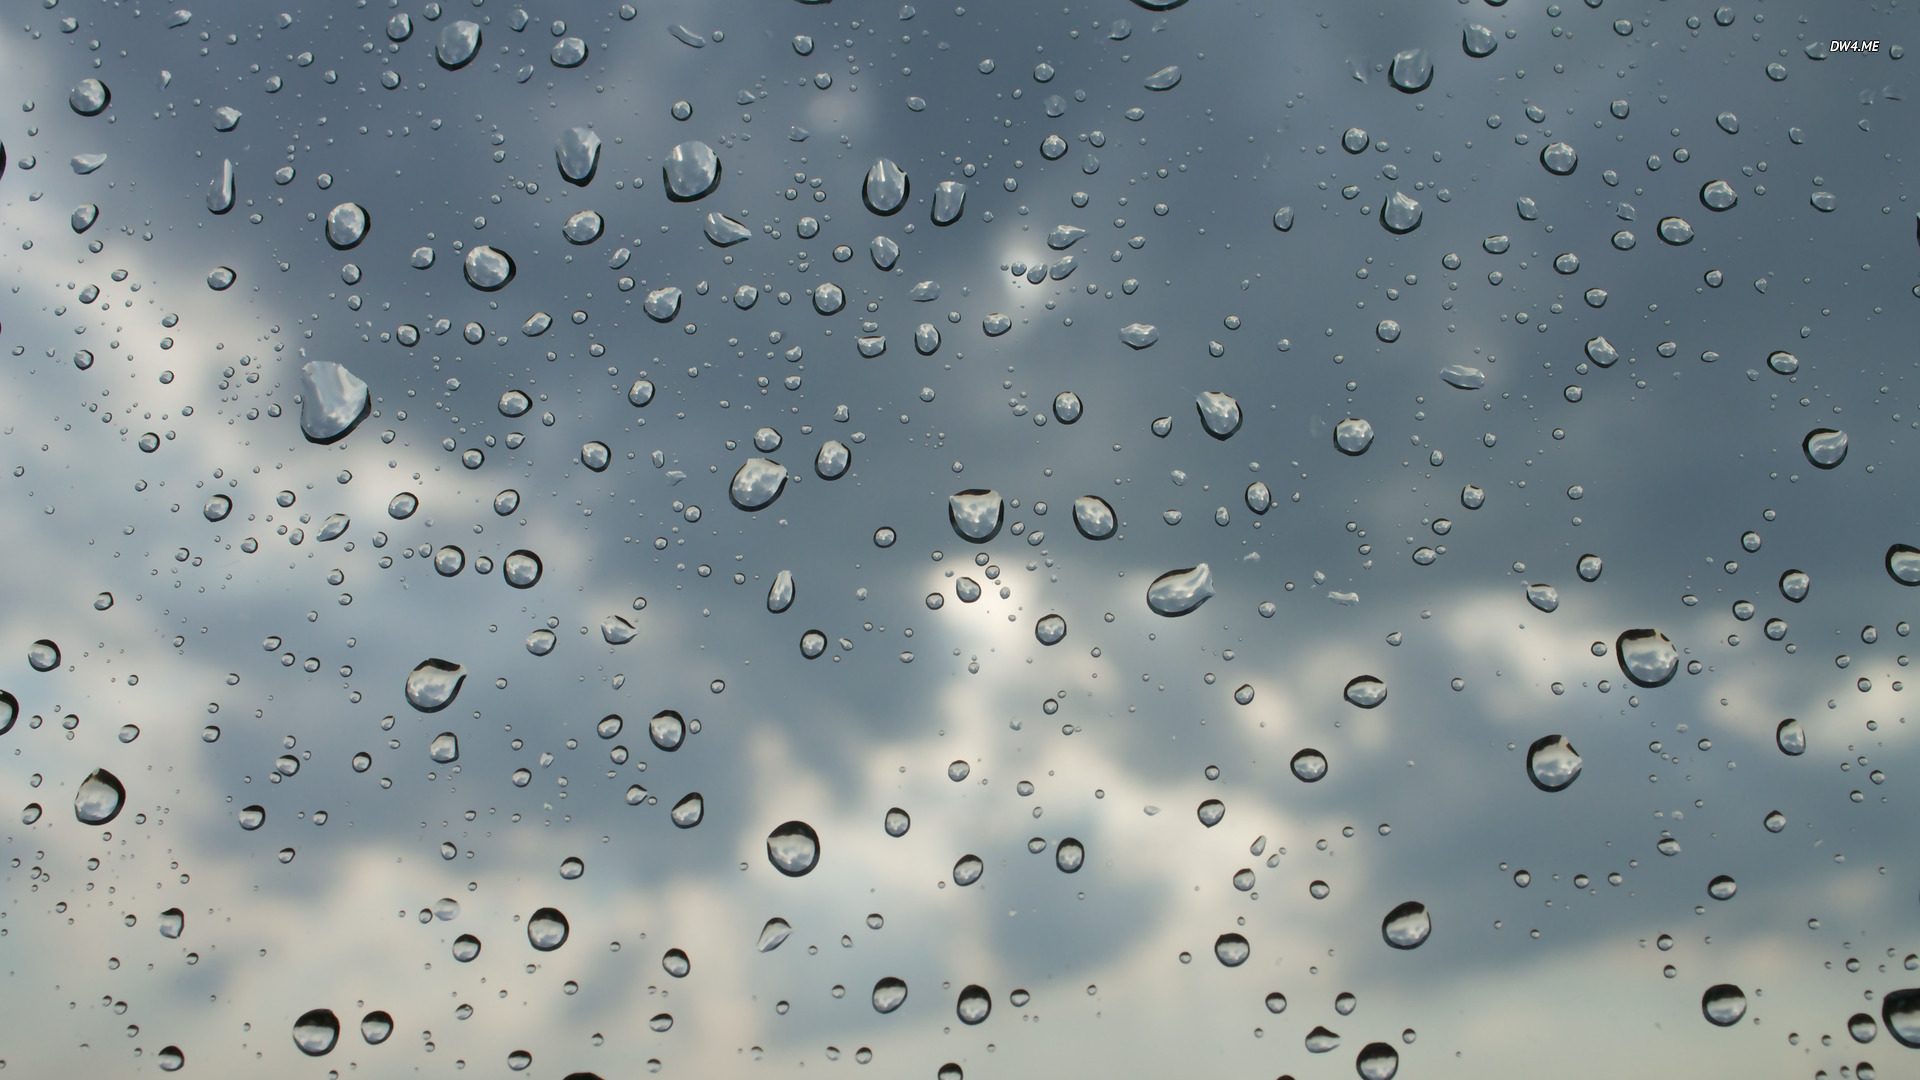 Raindrops and clouds wallpaper   588882